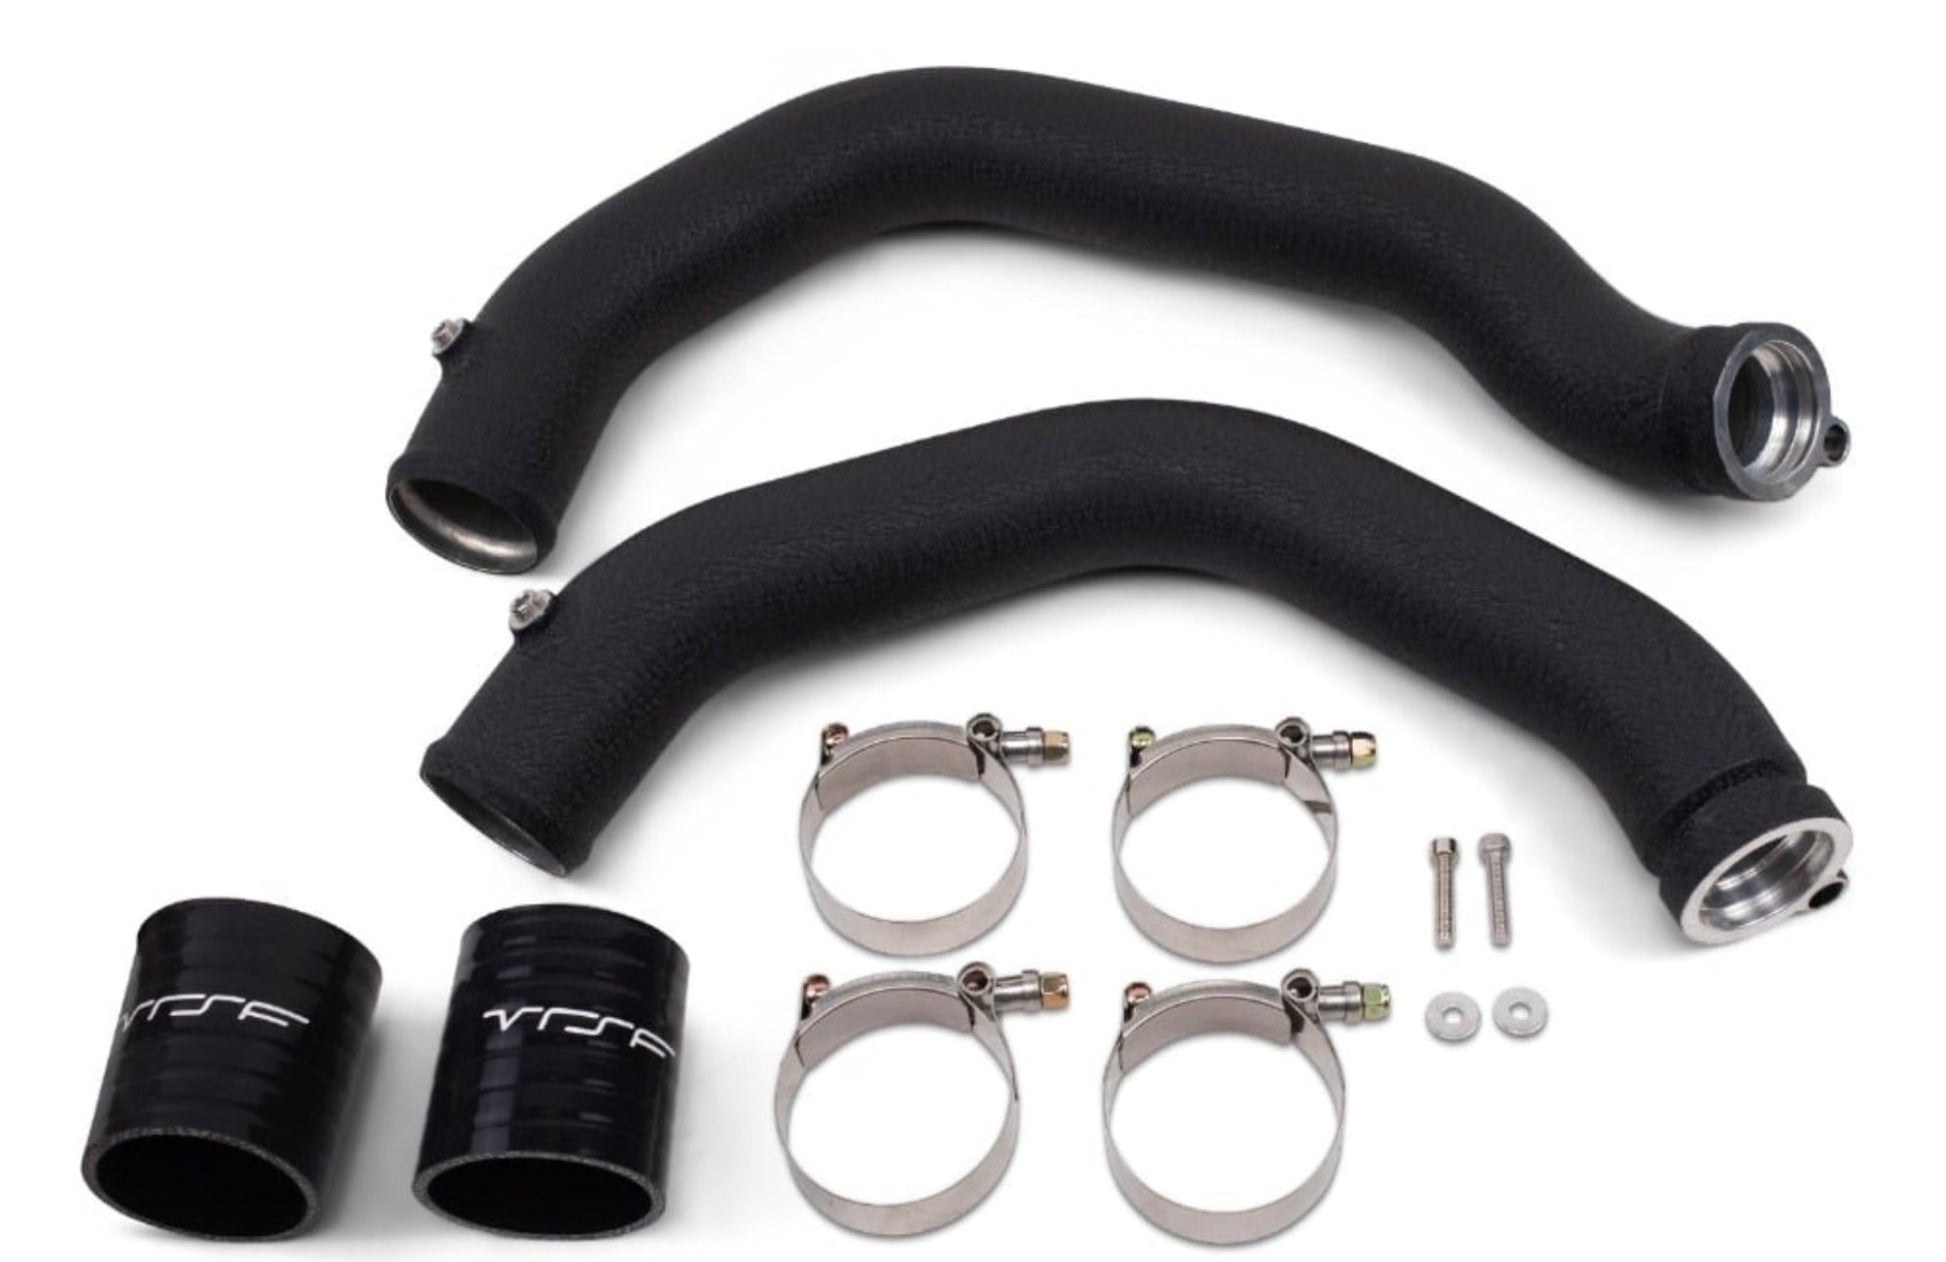 VRSF Charge Pipe for 335d Coolant Tank & Relocated Intakes 07-13 BMW N54/N55 135i/335i E82/E90/E92